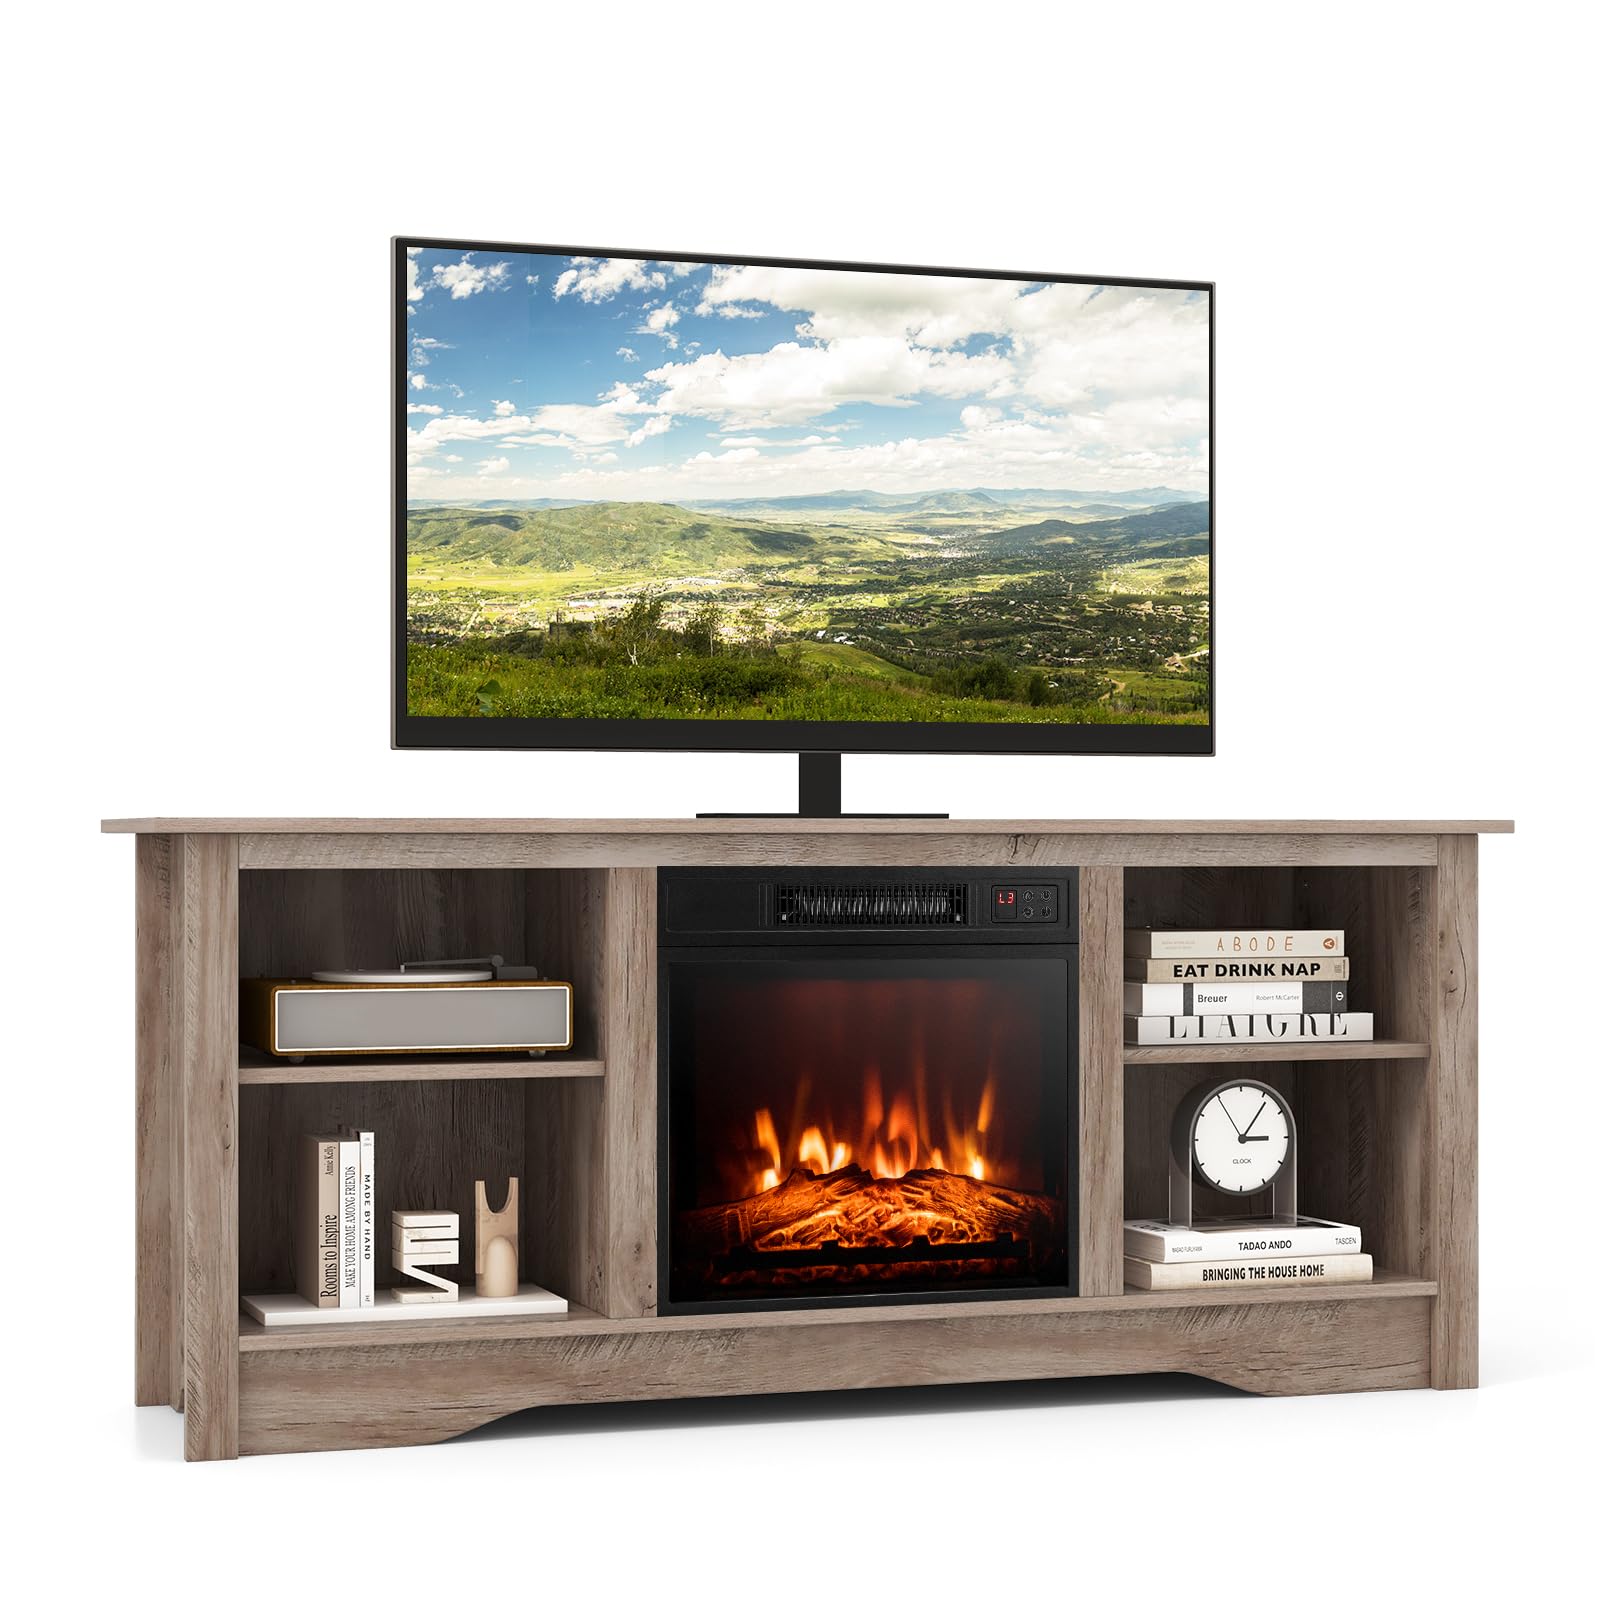 Giantex TV Stand with Fireplace - TV Cabinet with Adjustable Shelves